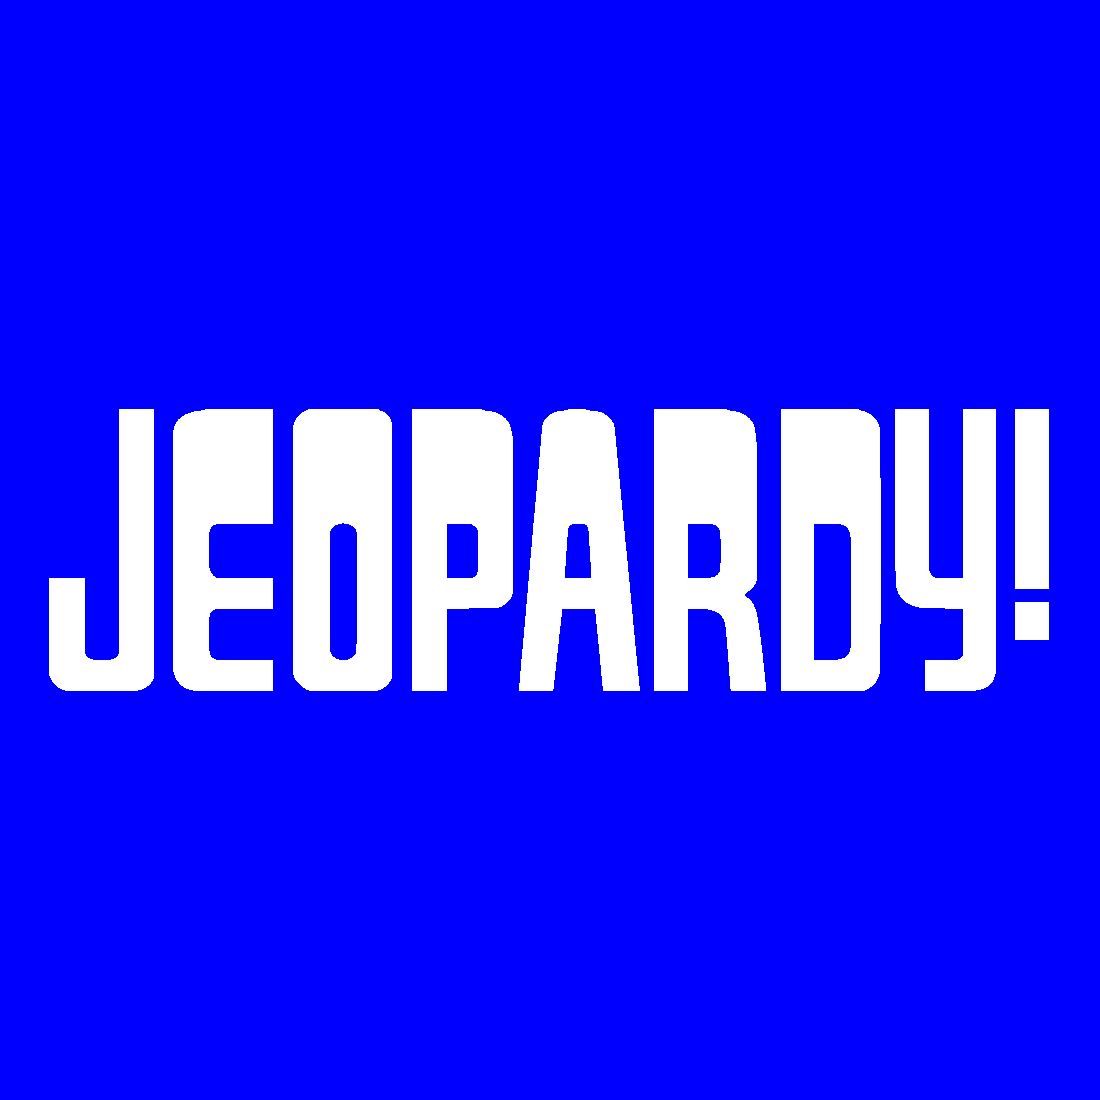 Blue with White Letters Logo - Image - Jeopardy! Logo in Blue Background in White Letters.png ...